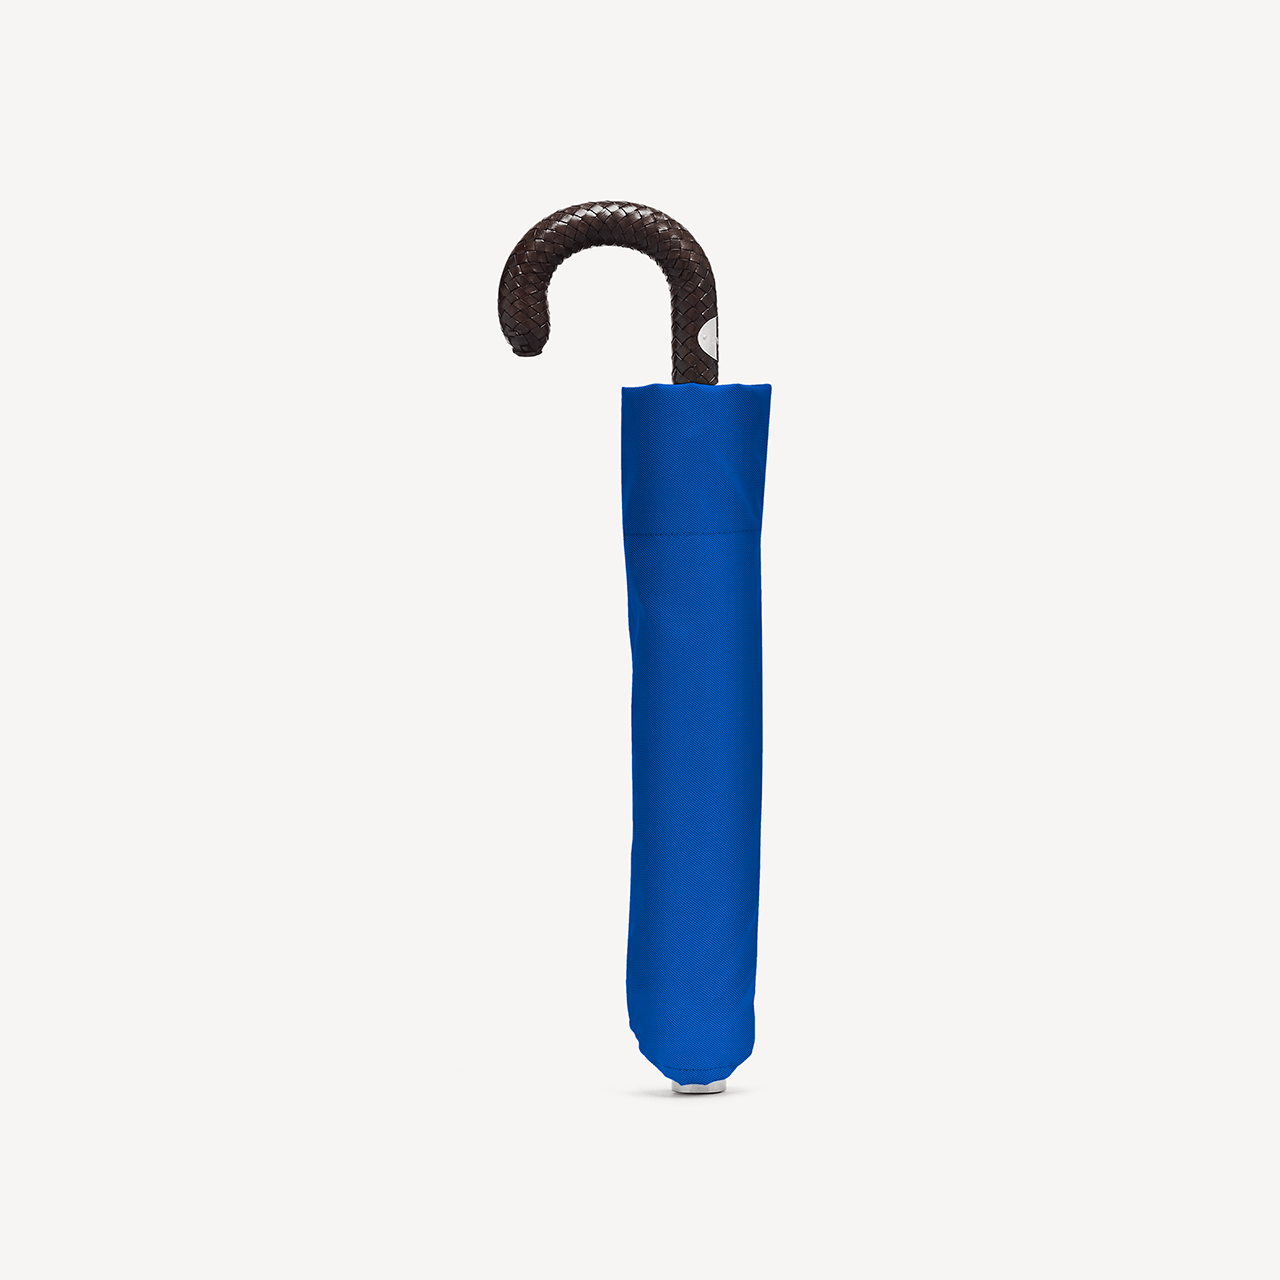 Collapsible Umbrella with Braided Leather Handle - Royal Blue - Swaine